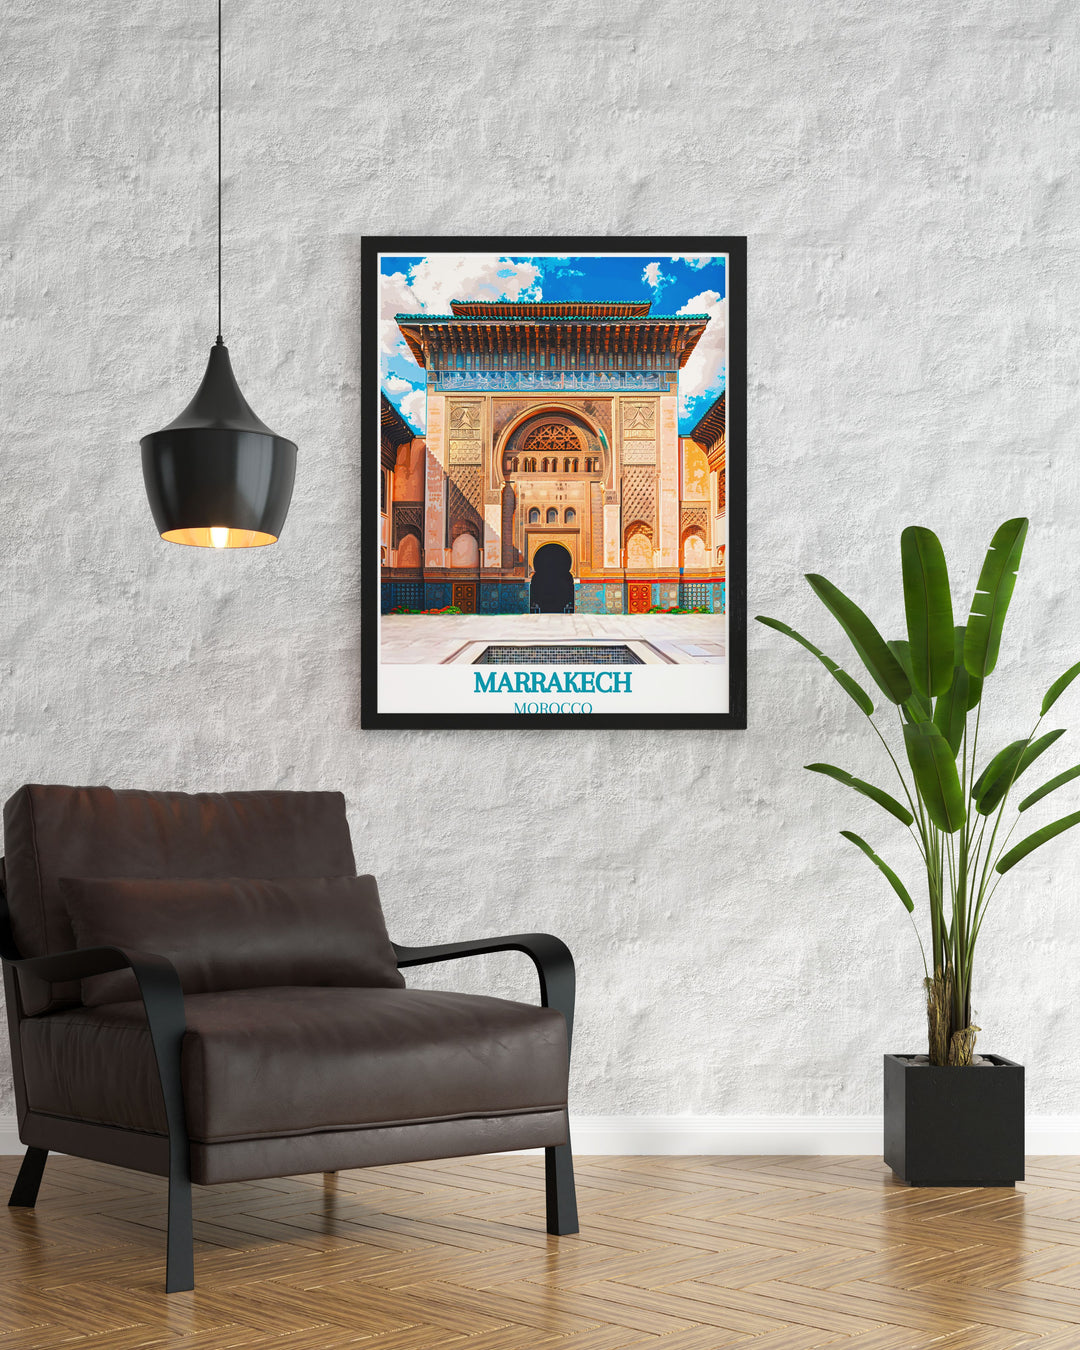 This detailed poster of Marrakech illustrates the citys bustling souks and historic sites, making it an excellent addition to any art collection celebrating Moroccan culture.